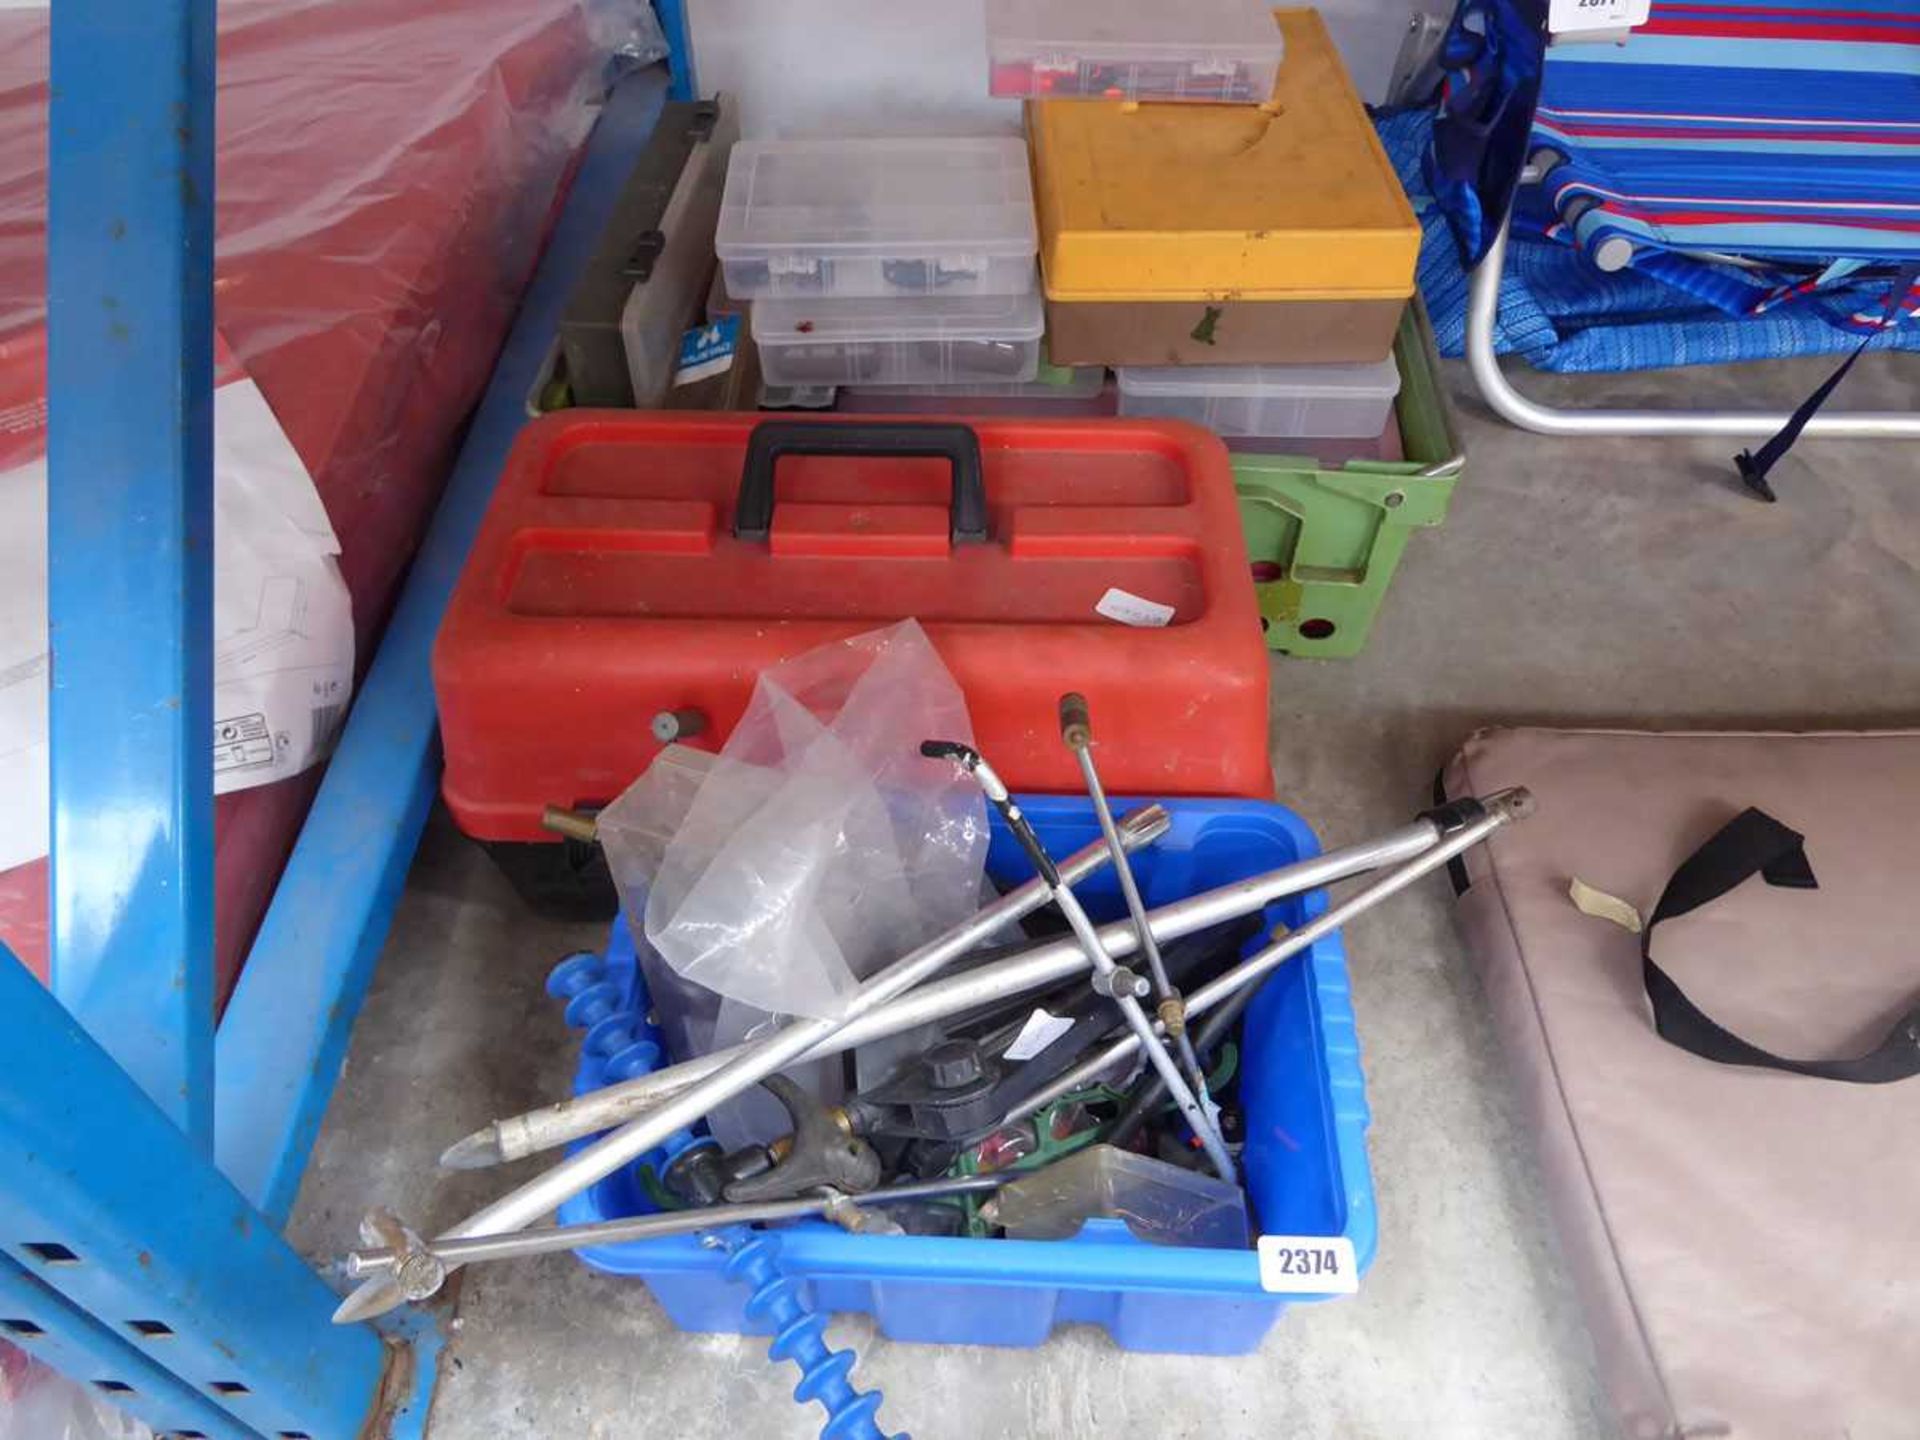 3 boxes of various fishing related items incl. floats, rod stands, etc.